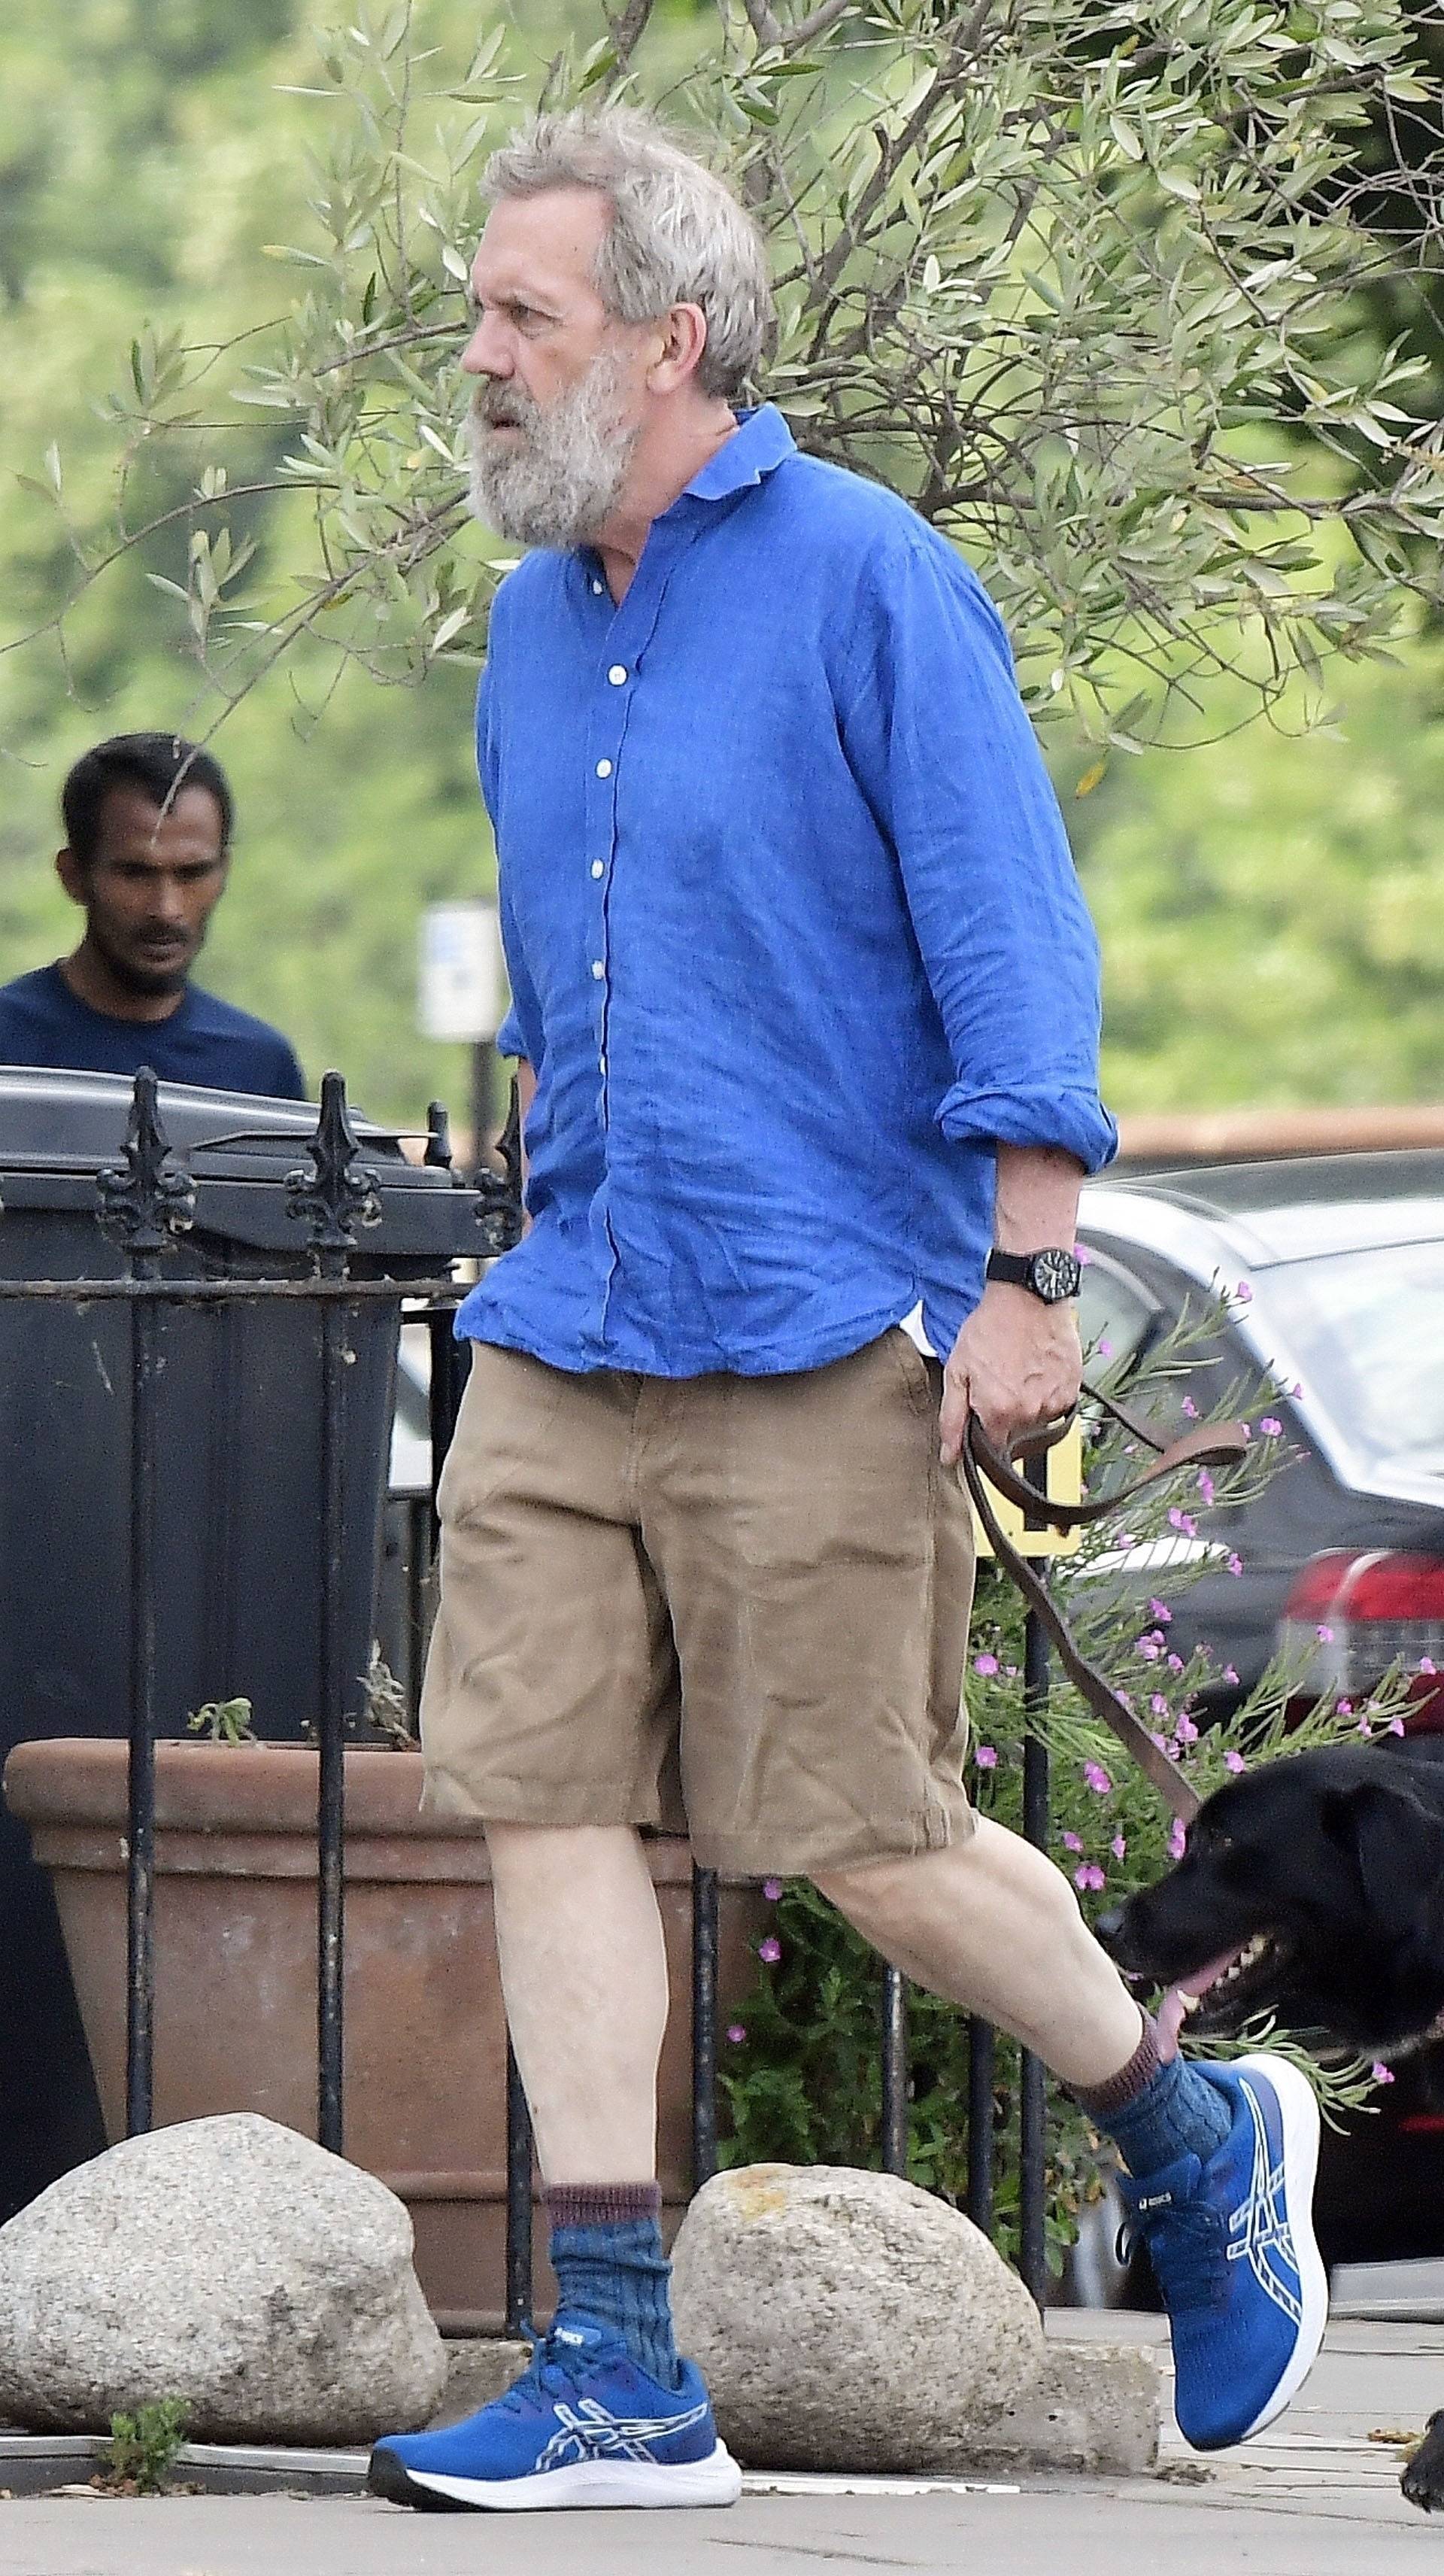 *EXCLUSIVE* STRICTLY NOT AVAILABLE FOR ONLINE USAGE UNTIL 22:00 PM UK TIME ON 02/08/2022 - WEB MUST CALL FOR PRICING  - 

The English Actor Hugh Laurie cuts a rather dishevelled look during his jaunt out walking the dog in North London.
*PICTURES TAEKN ON